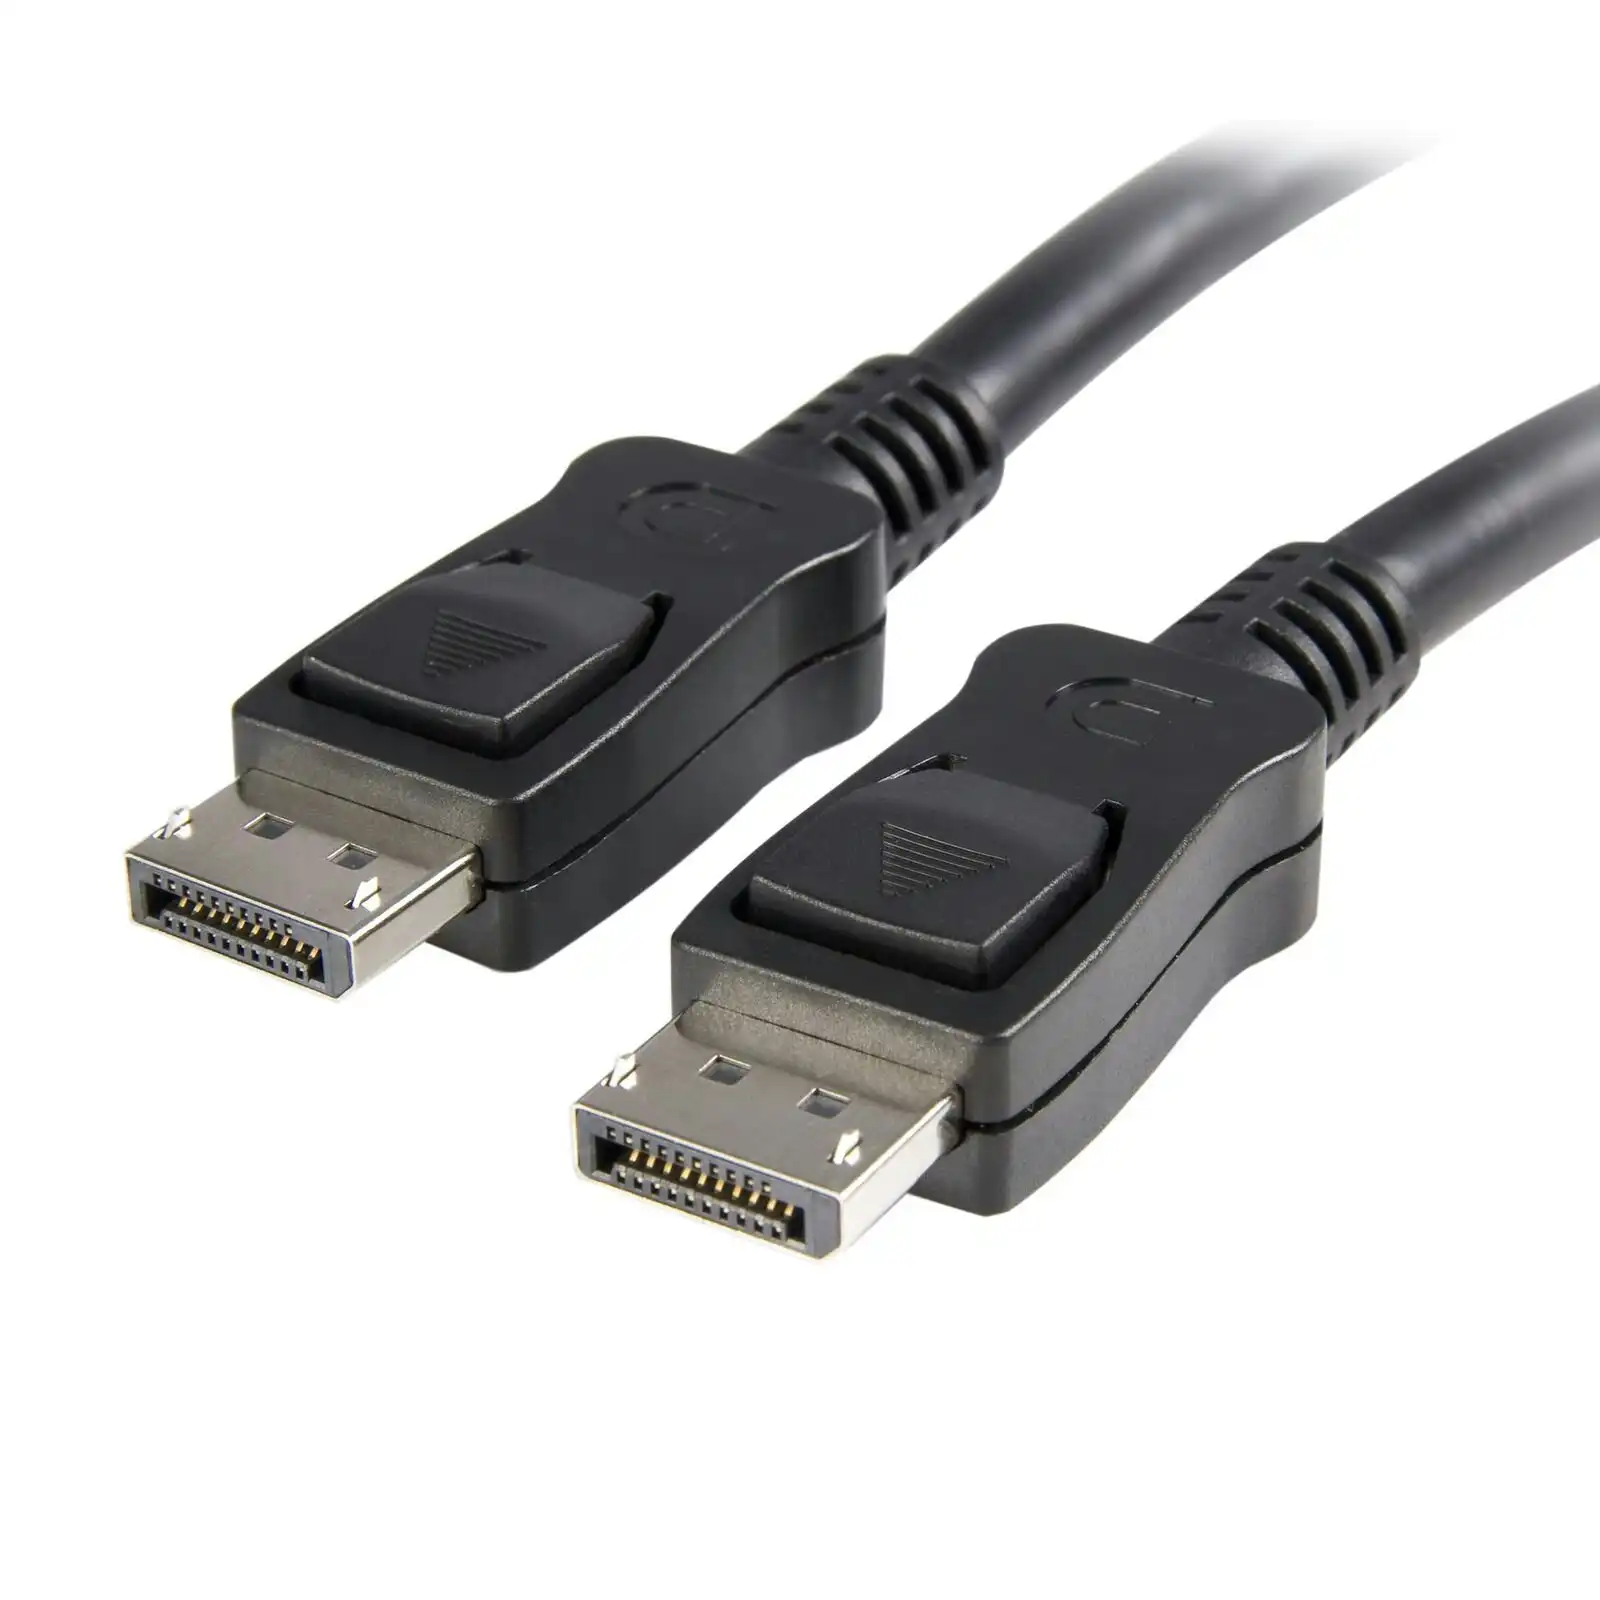 Star Tech DisplayPort Cable 3m Male To Male 4k x 2k/60Hz For PC/Monitors/Laptops